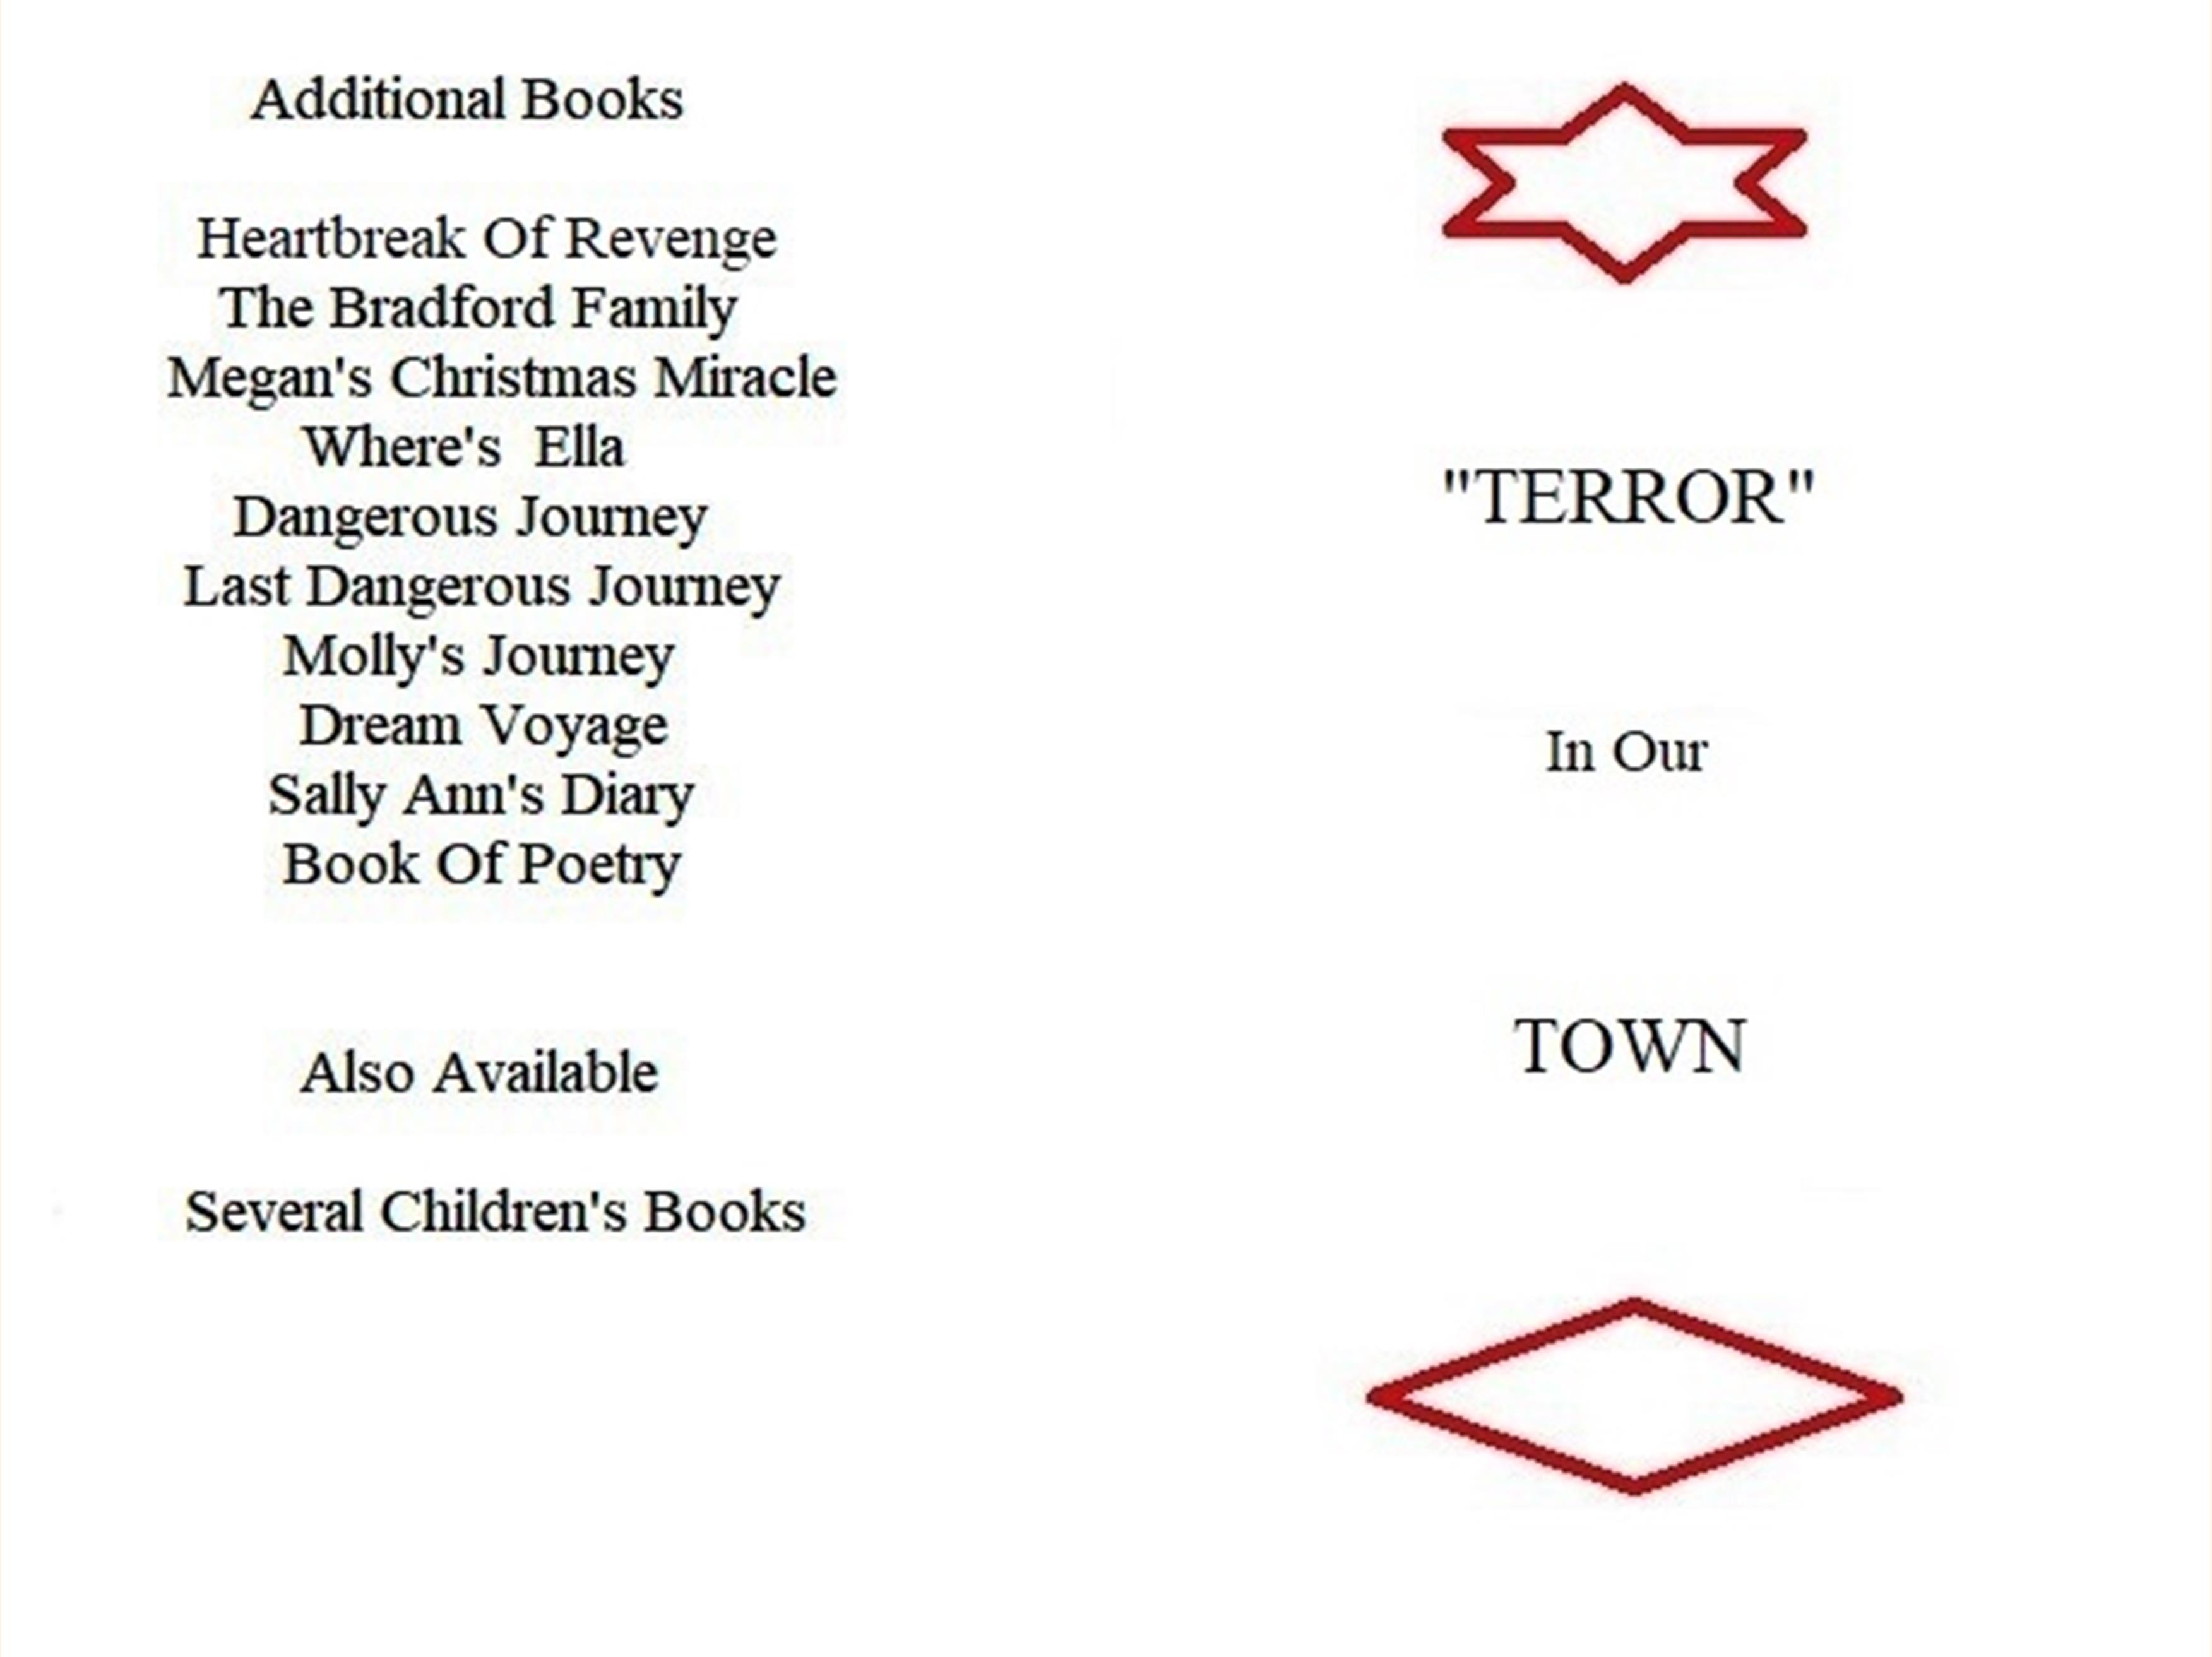 Terror in Our Town cover image